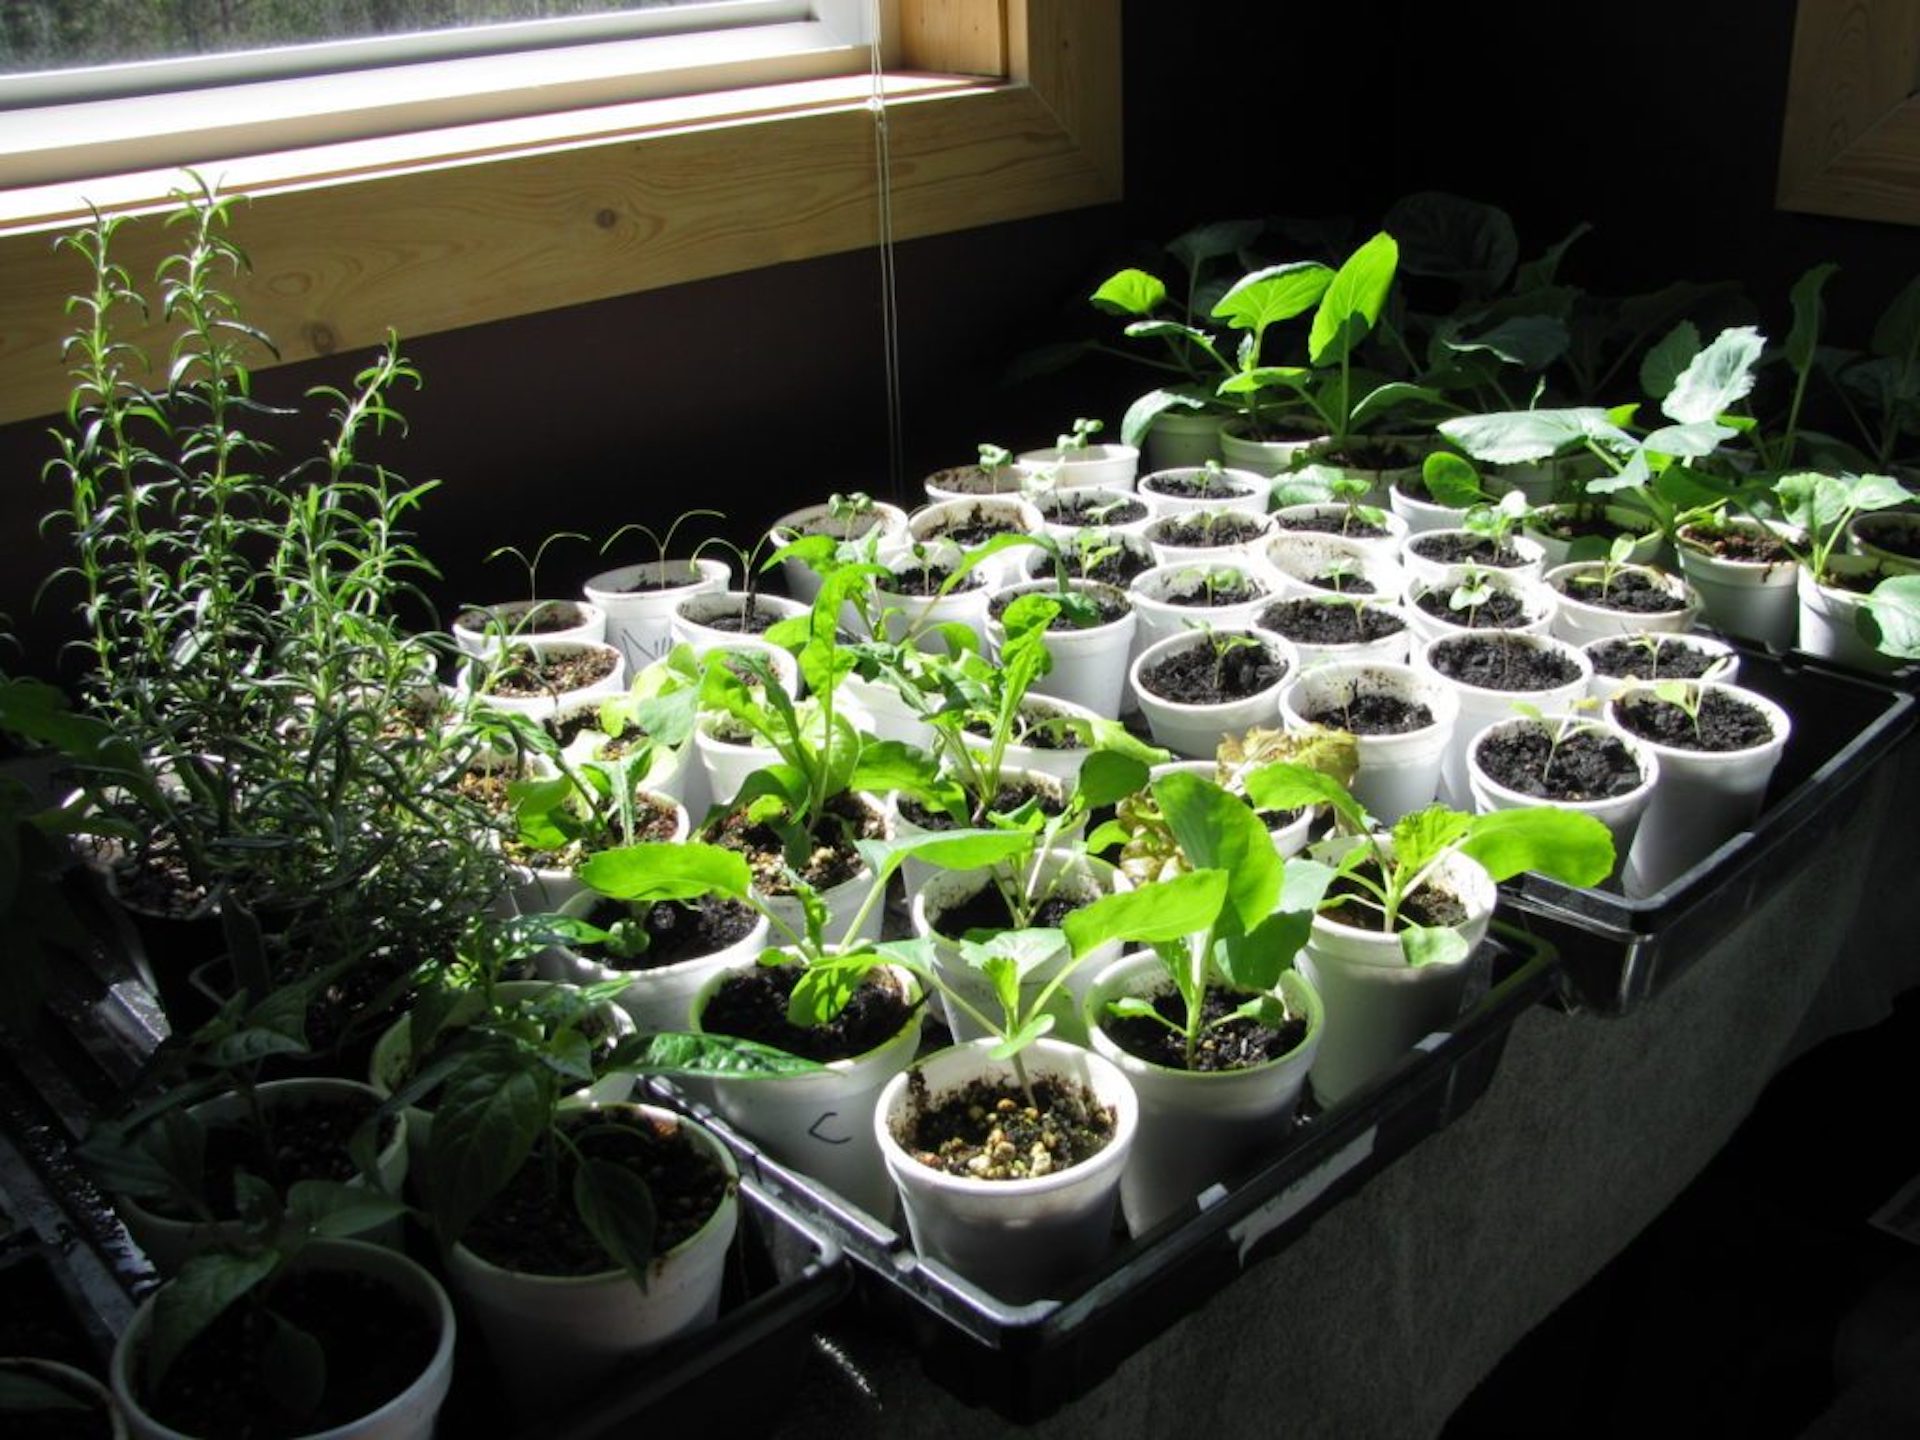 Plastic cups used for seedlings.